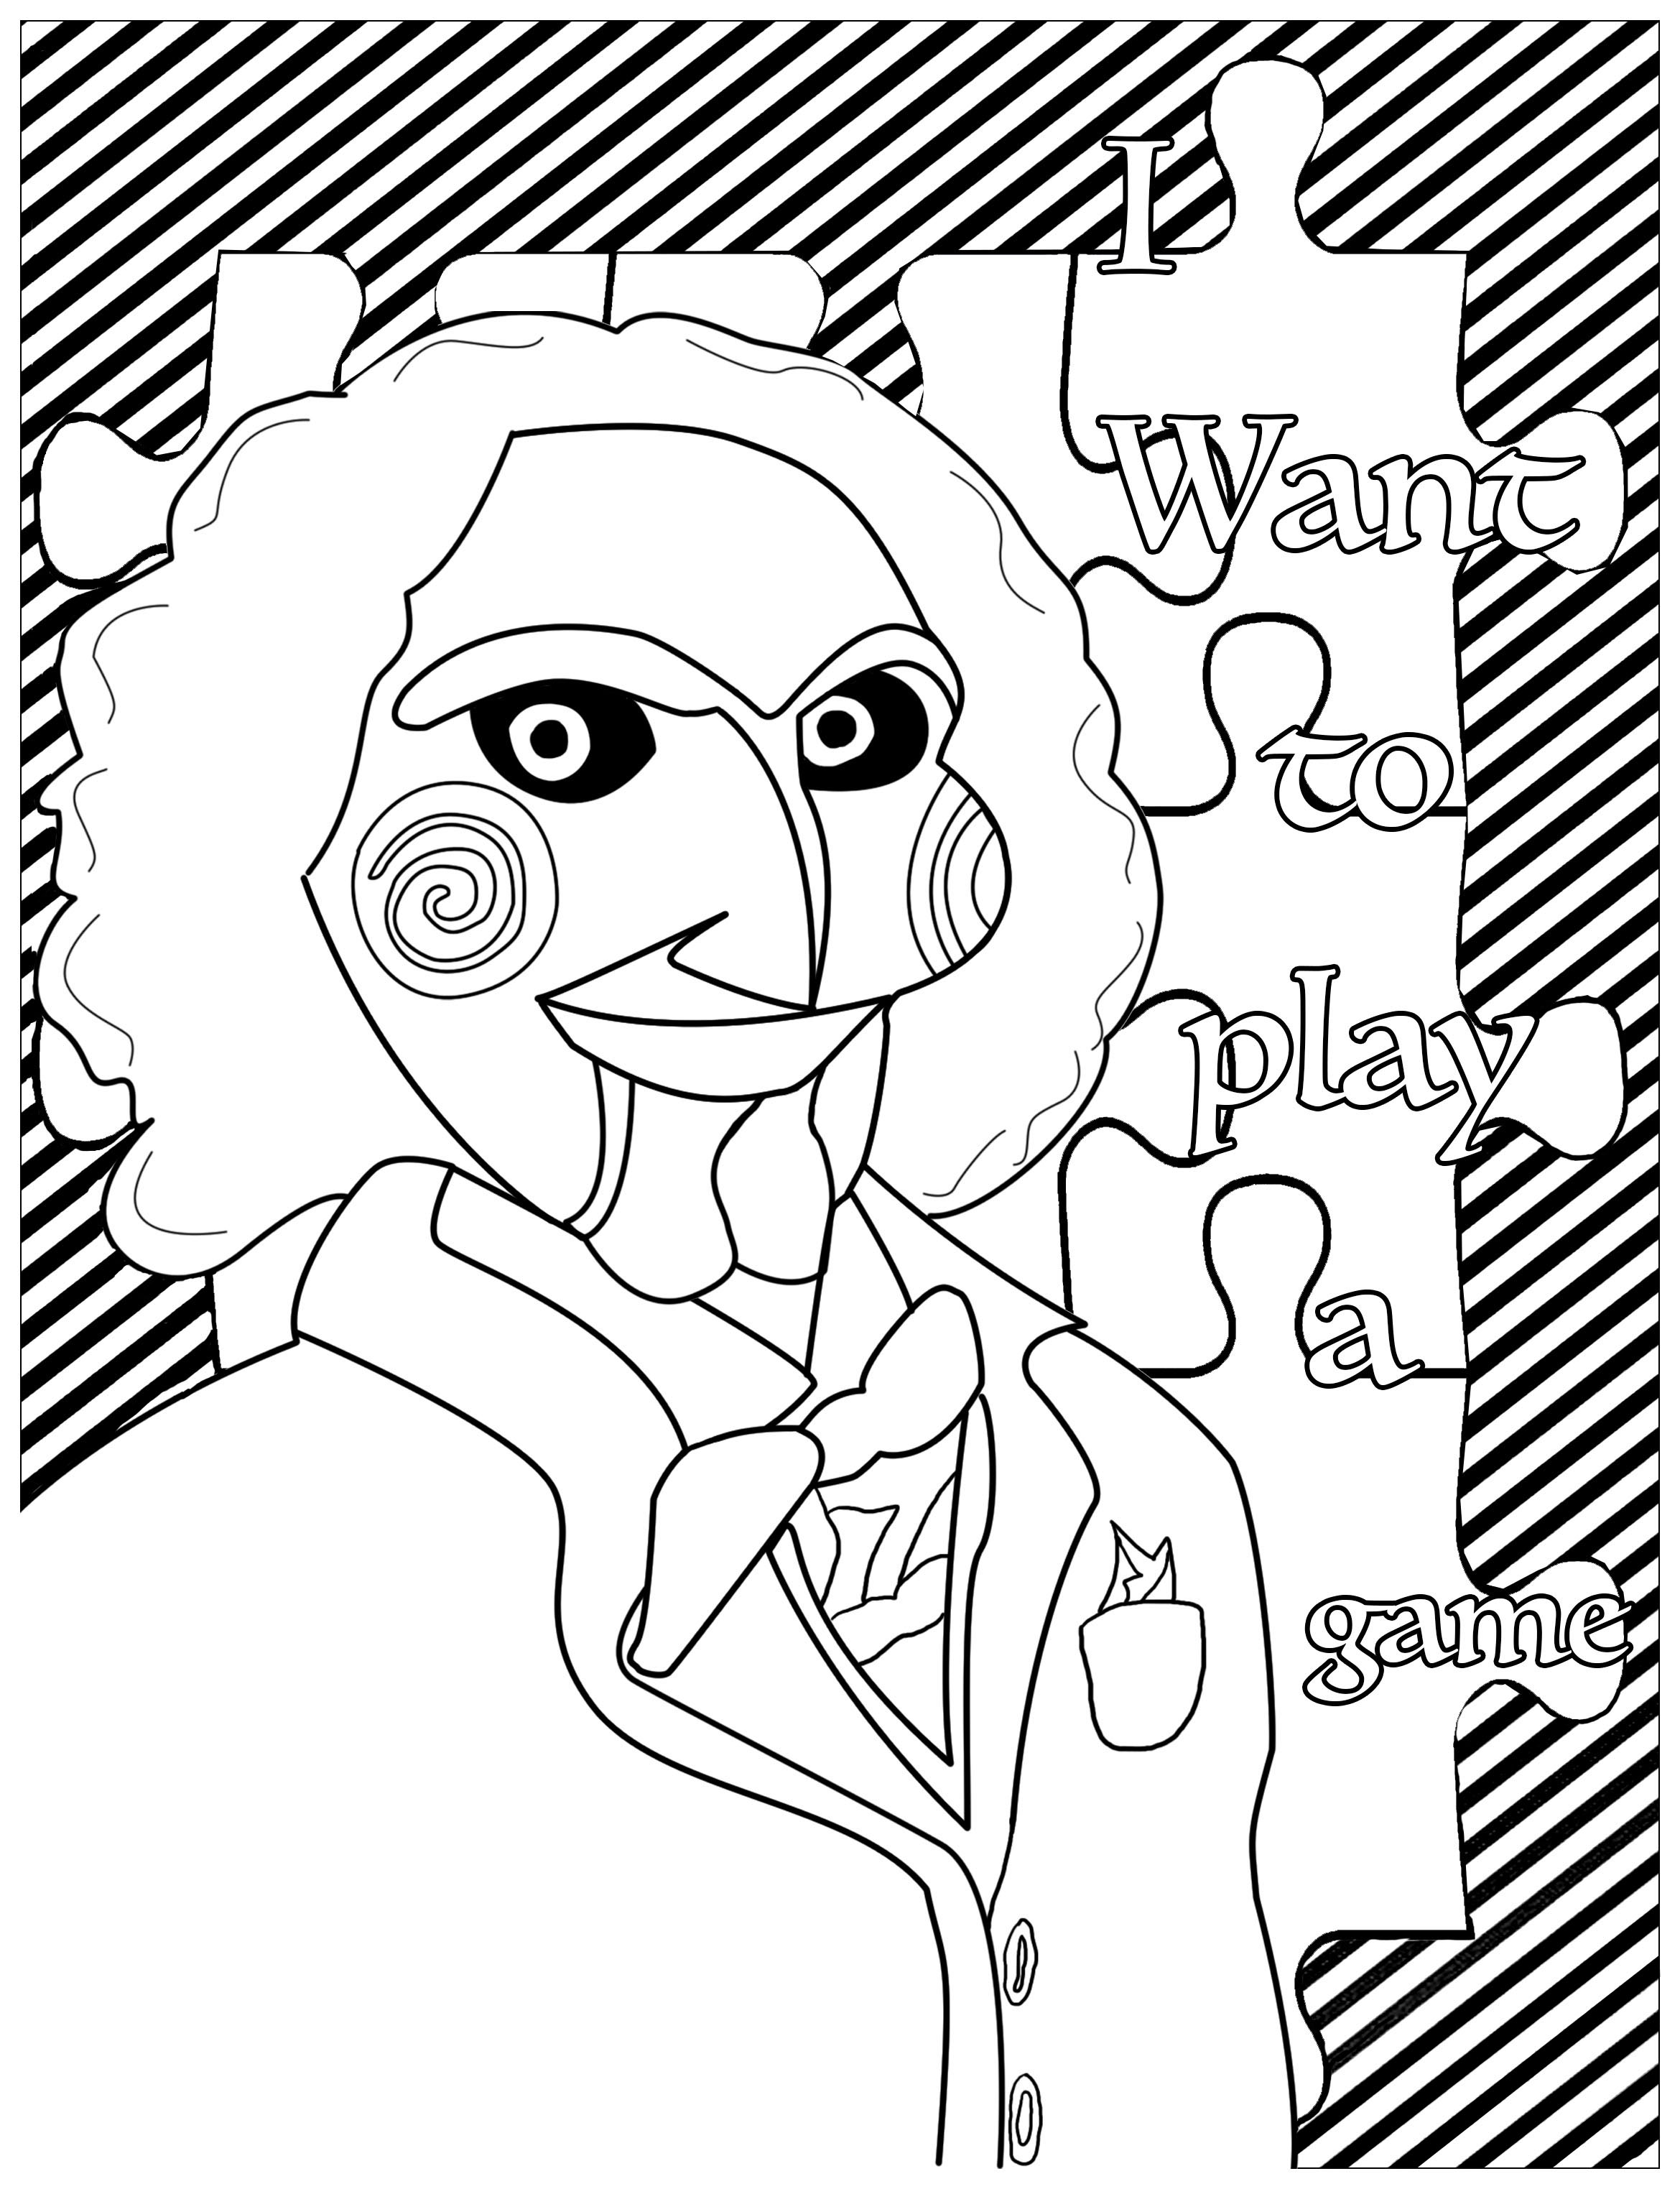 Jigsaw billy the puppet saw - Halloween Adult Coloring Pages